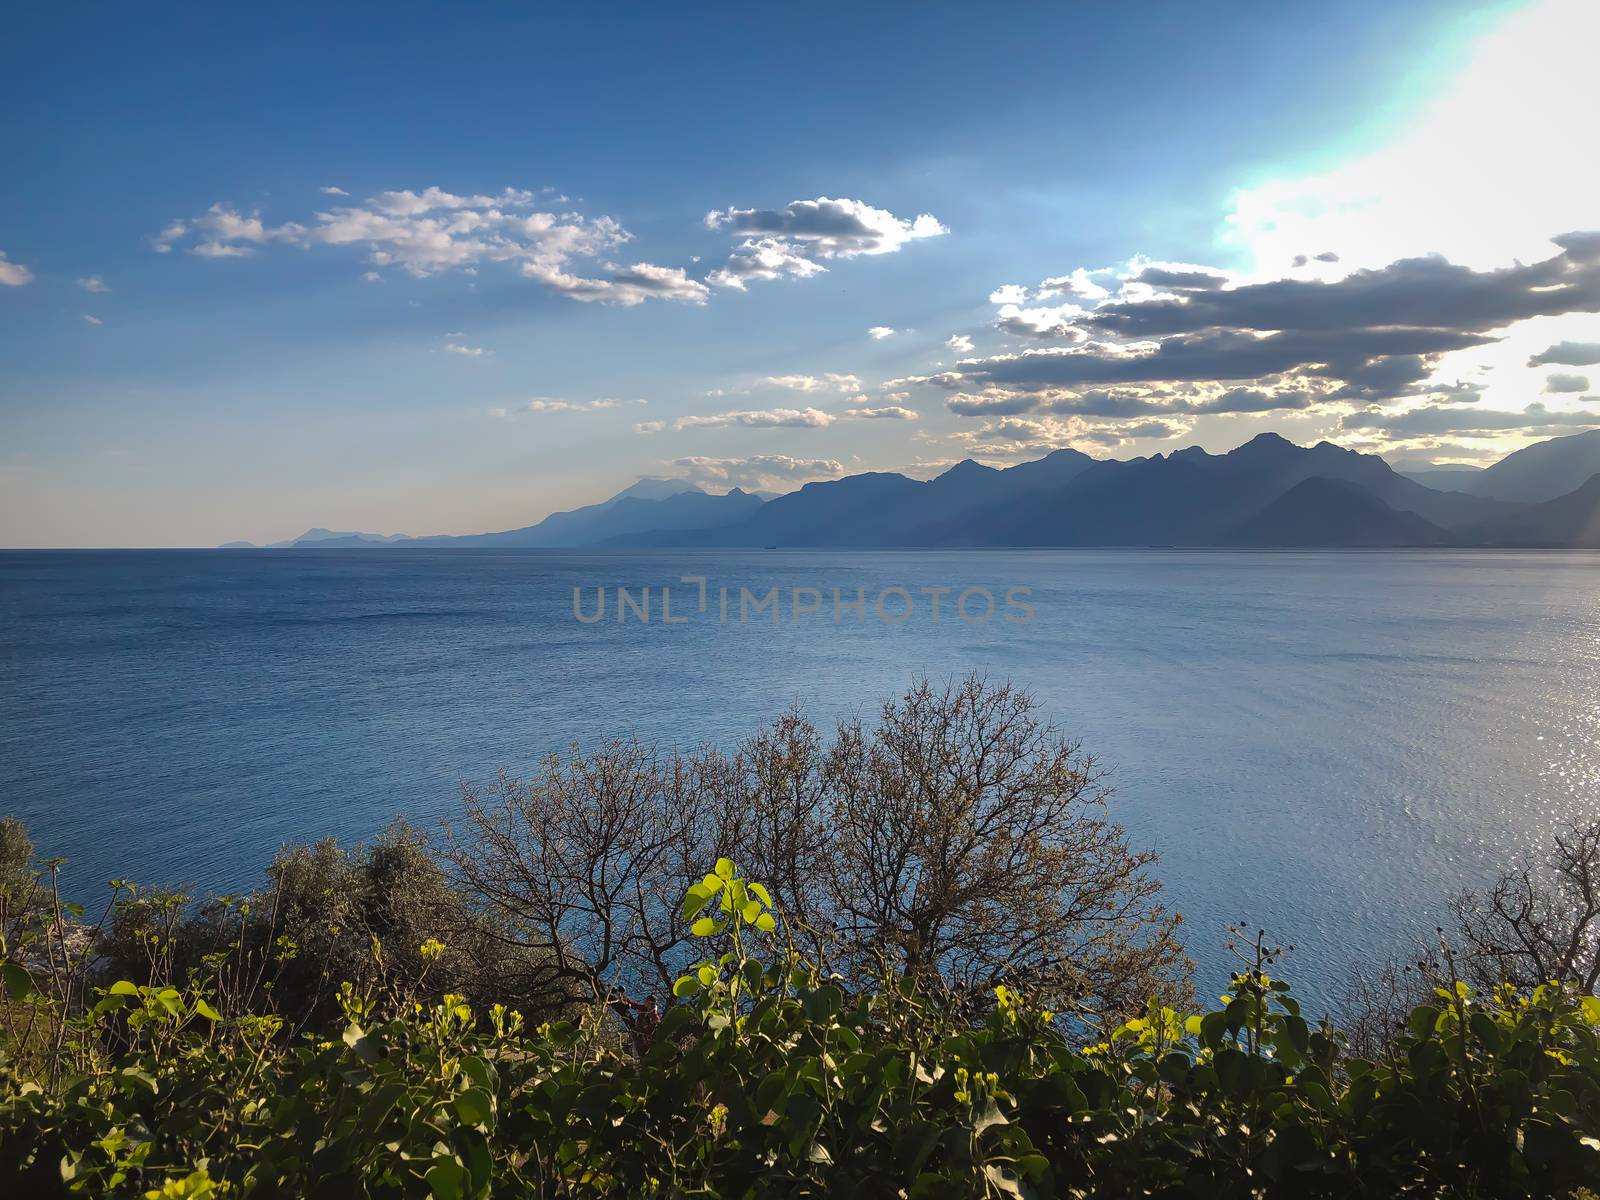 Landscape of Mediterranean sea mountains and blue sky